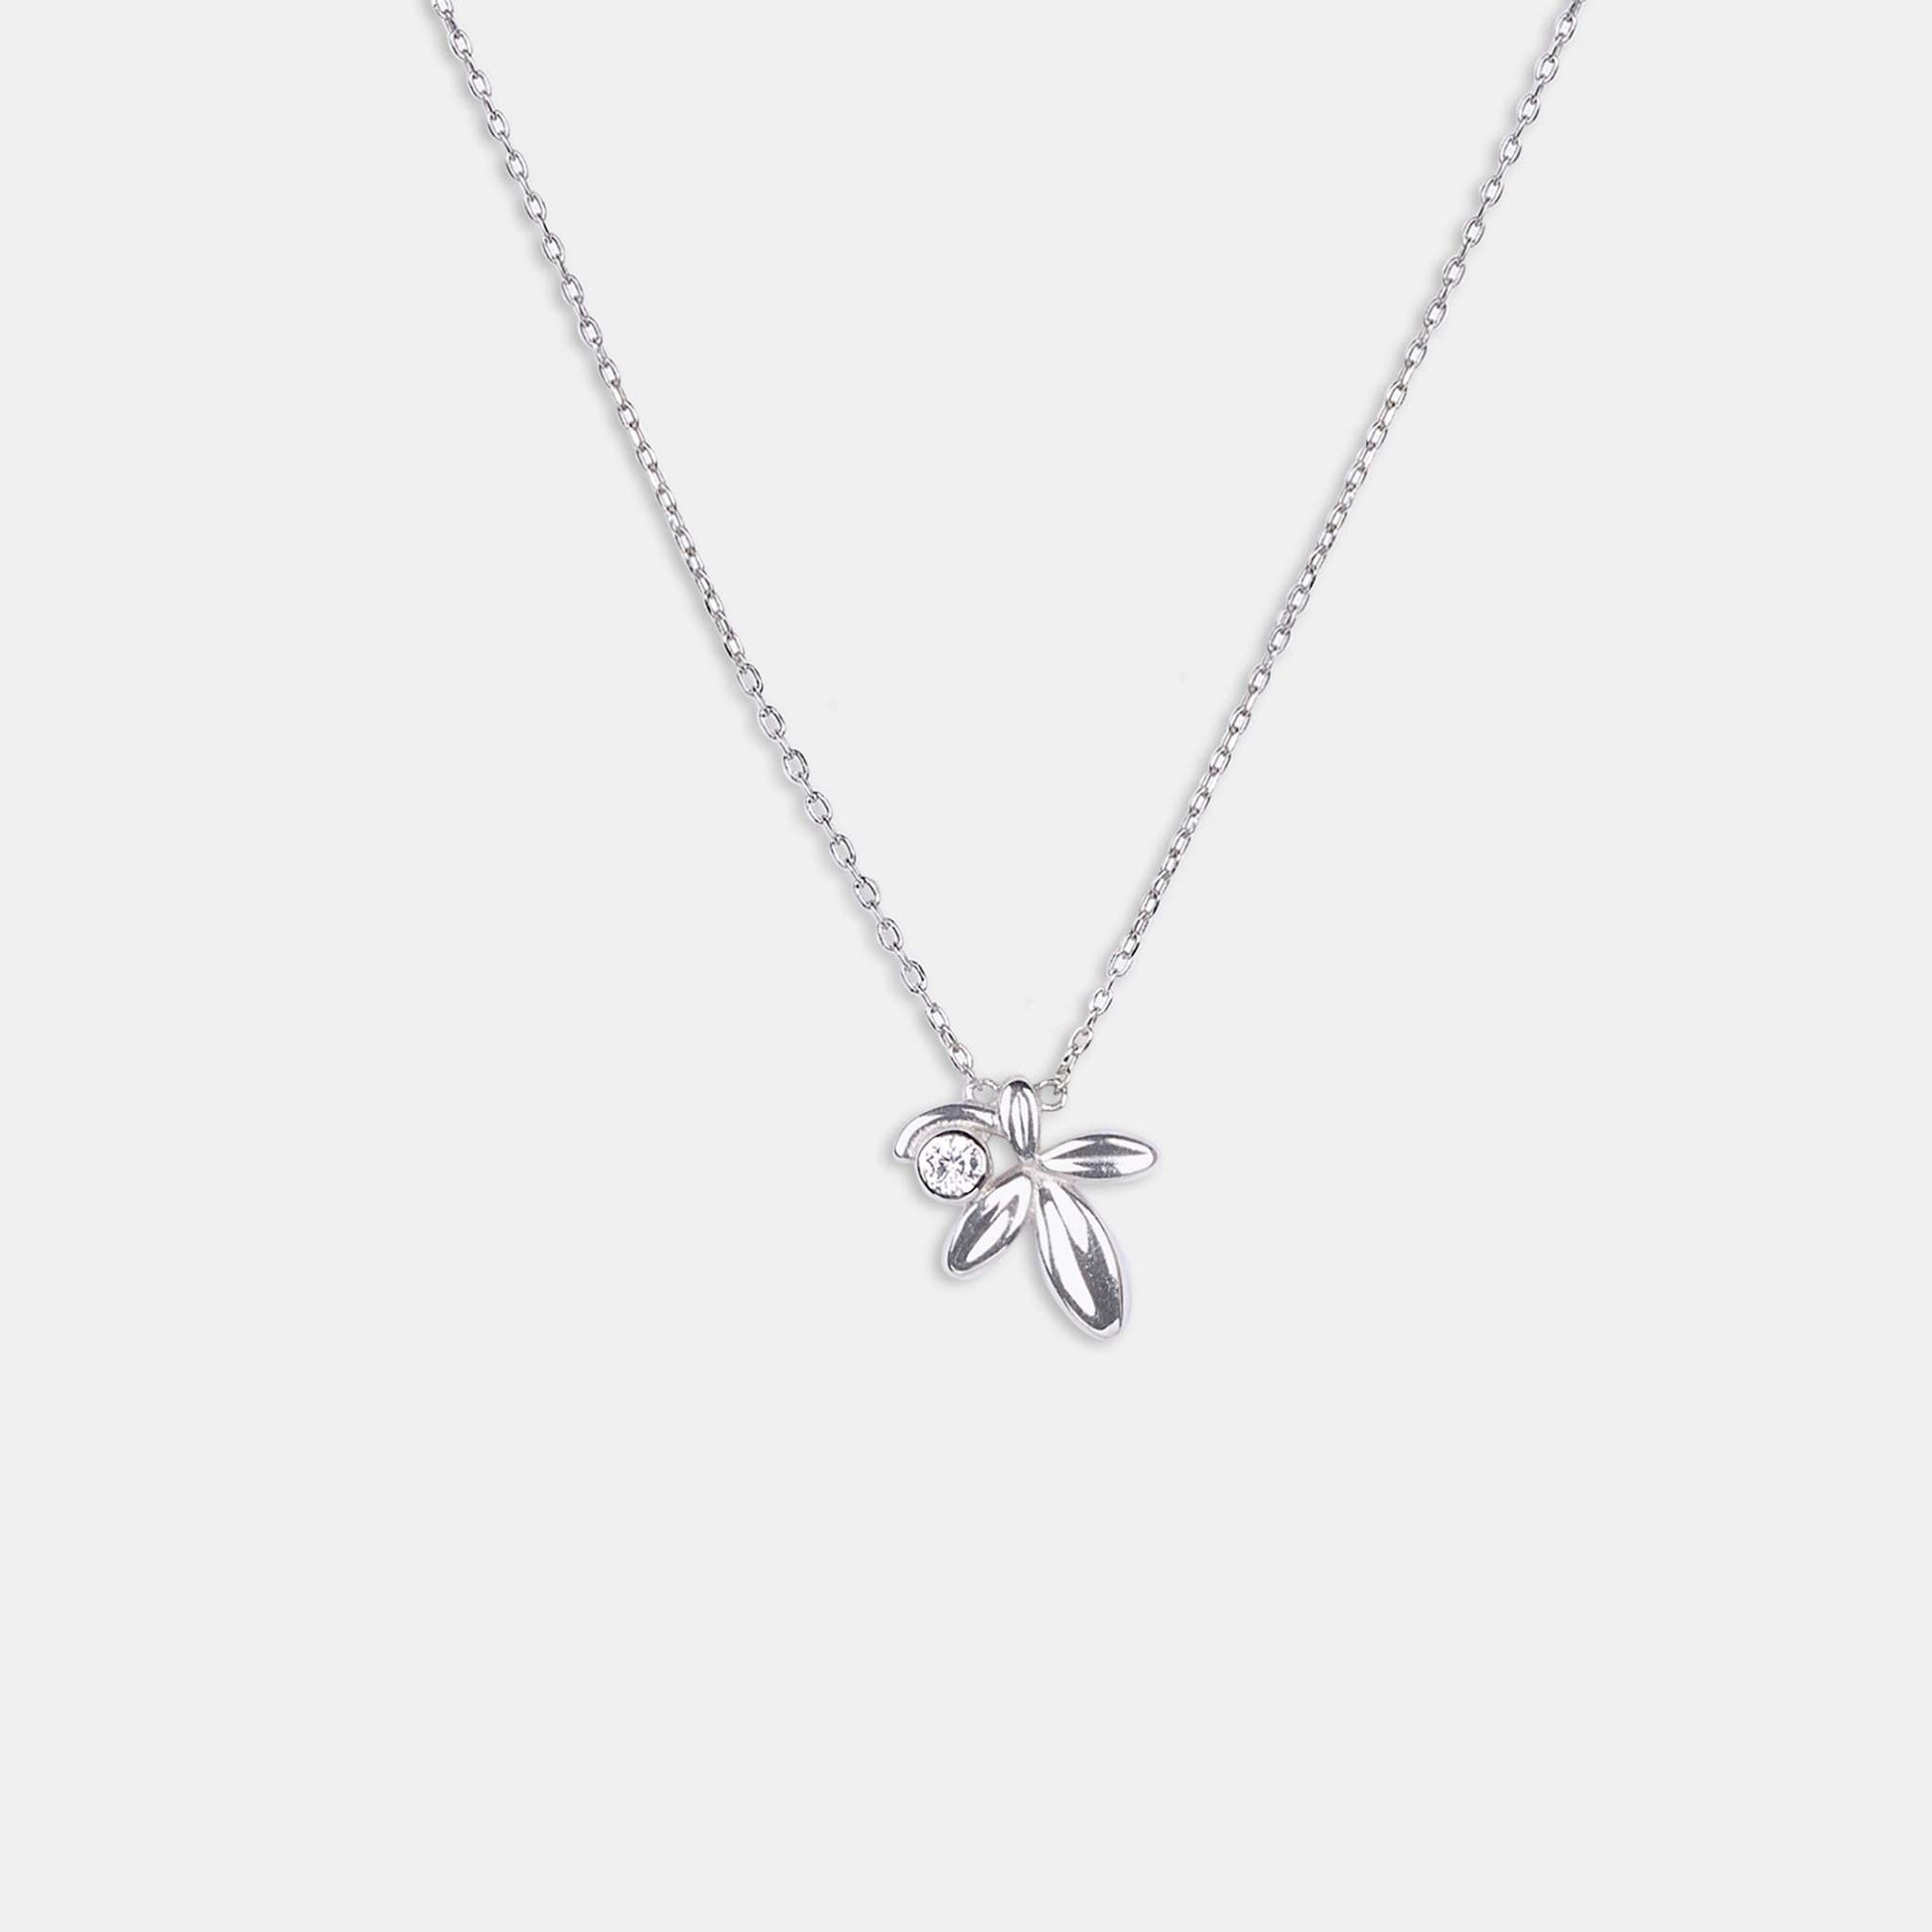 A dainty silver necklace featuring a charming flower pendant. Perfect for adding a touch of elegance to any outfit.A dainty silver necklace featuring a charming flower pendant. Perfect for adding a touch of elegance to any outfit.